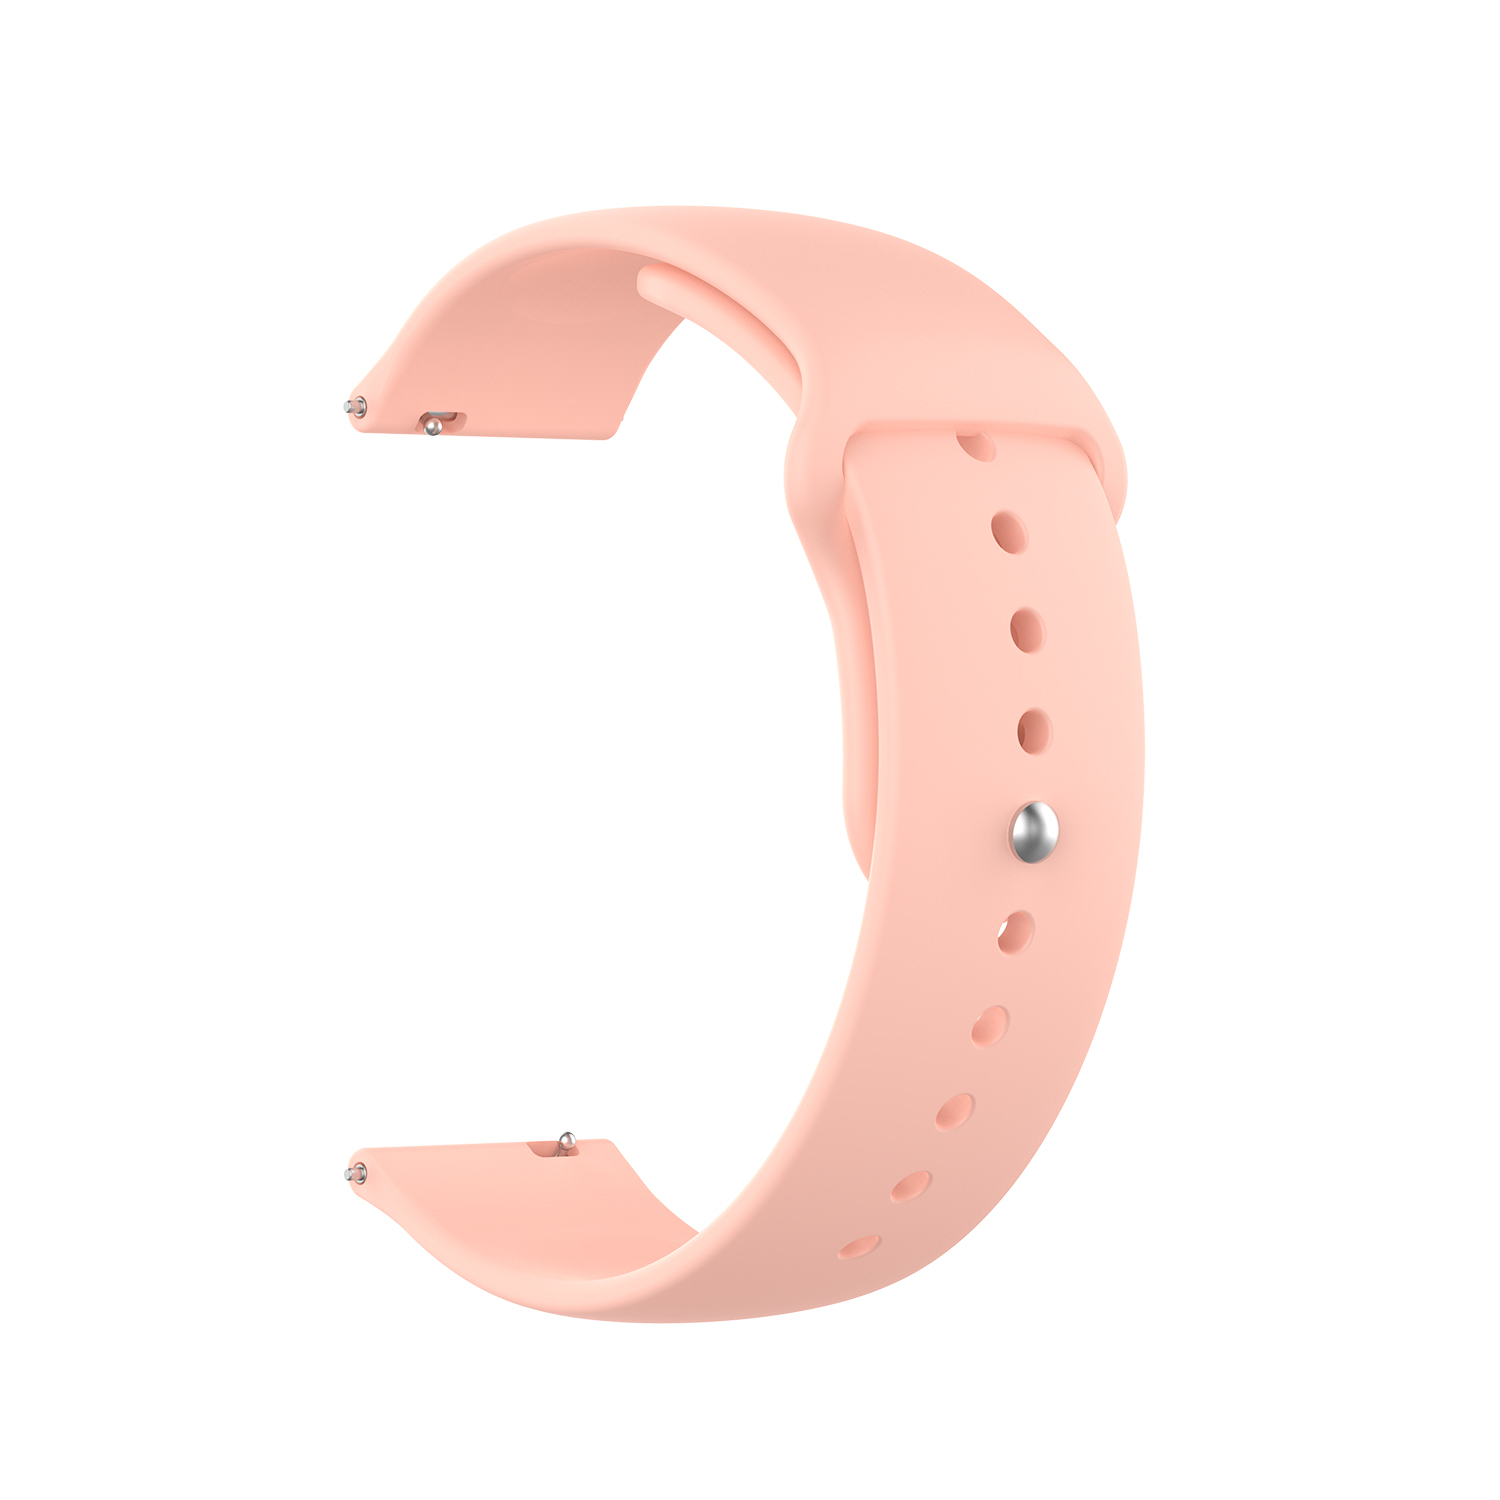 Bakeey-22mm-Solid-Color-SLR-Buckle-Silicone-Replacement-Strap-Smart-Watch-Band-For-Samsung-Galaxy-Wa-1814092-25